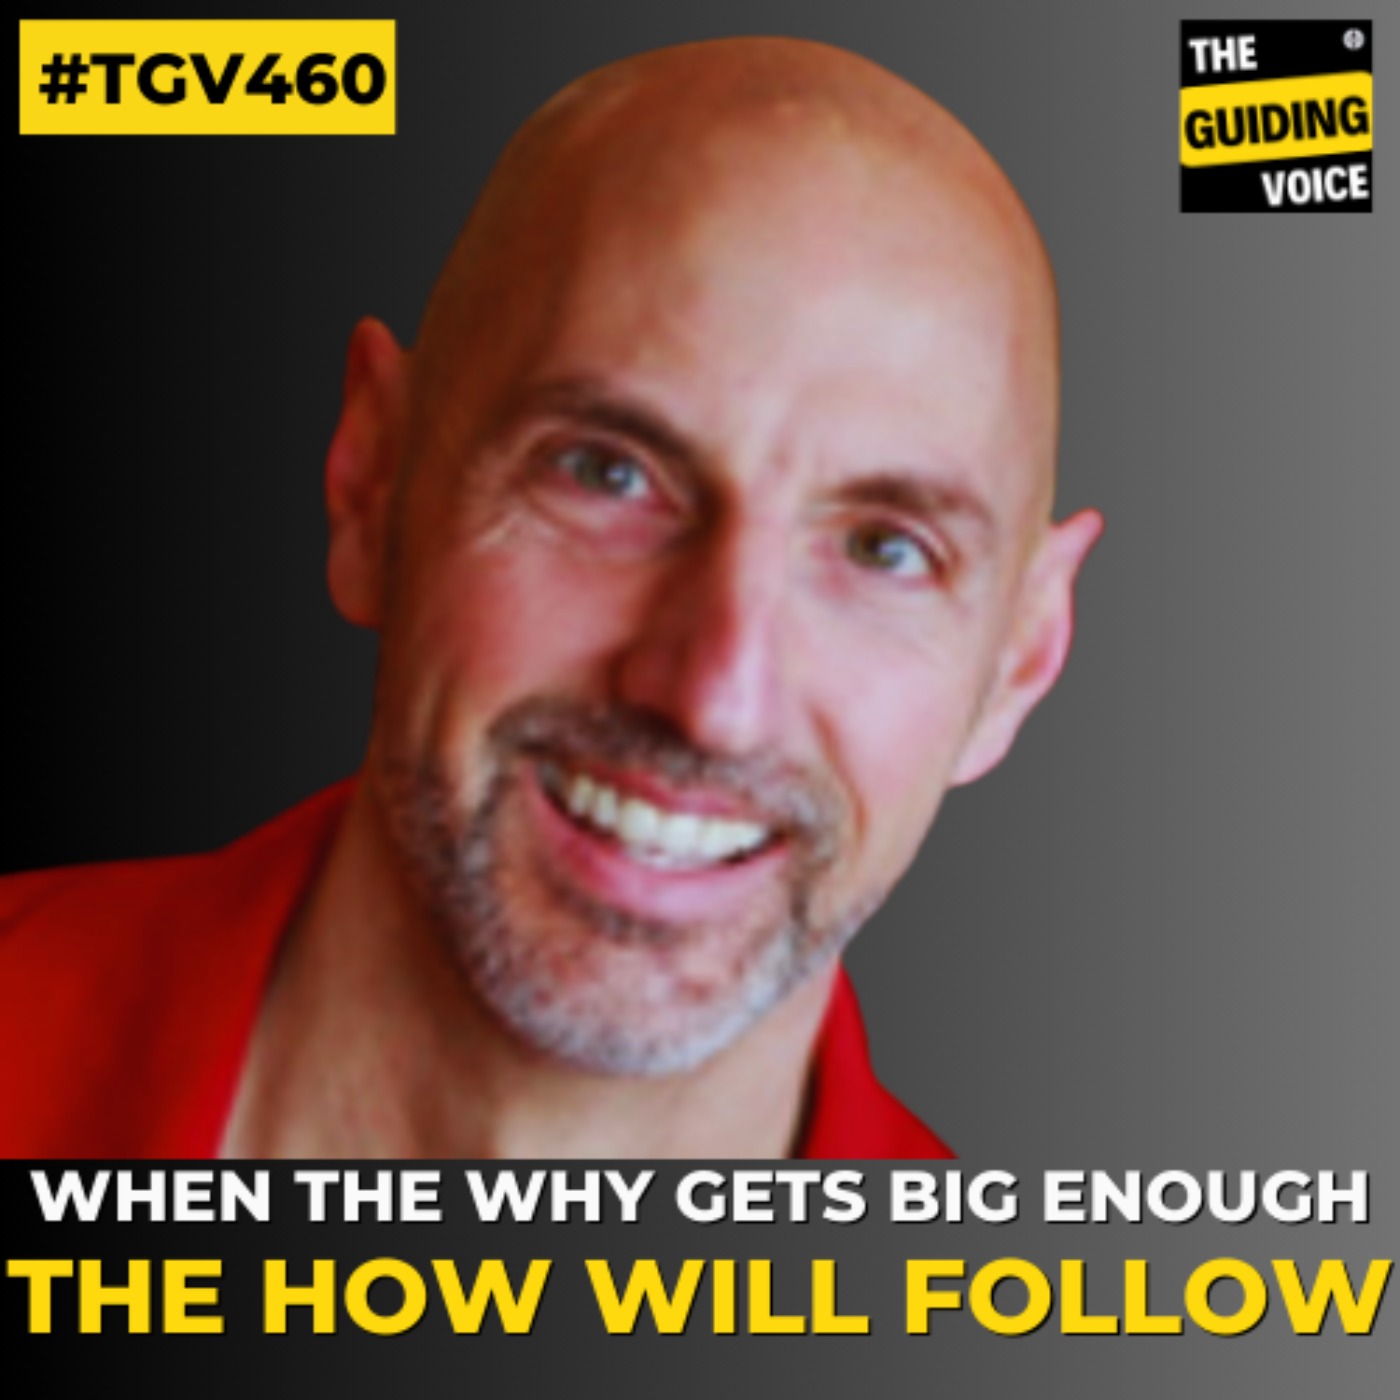 When the Why (heart set) gets big enough the How (mindset) will follow | Dan Hegerich | #TGV460